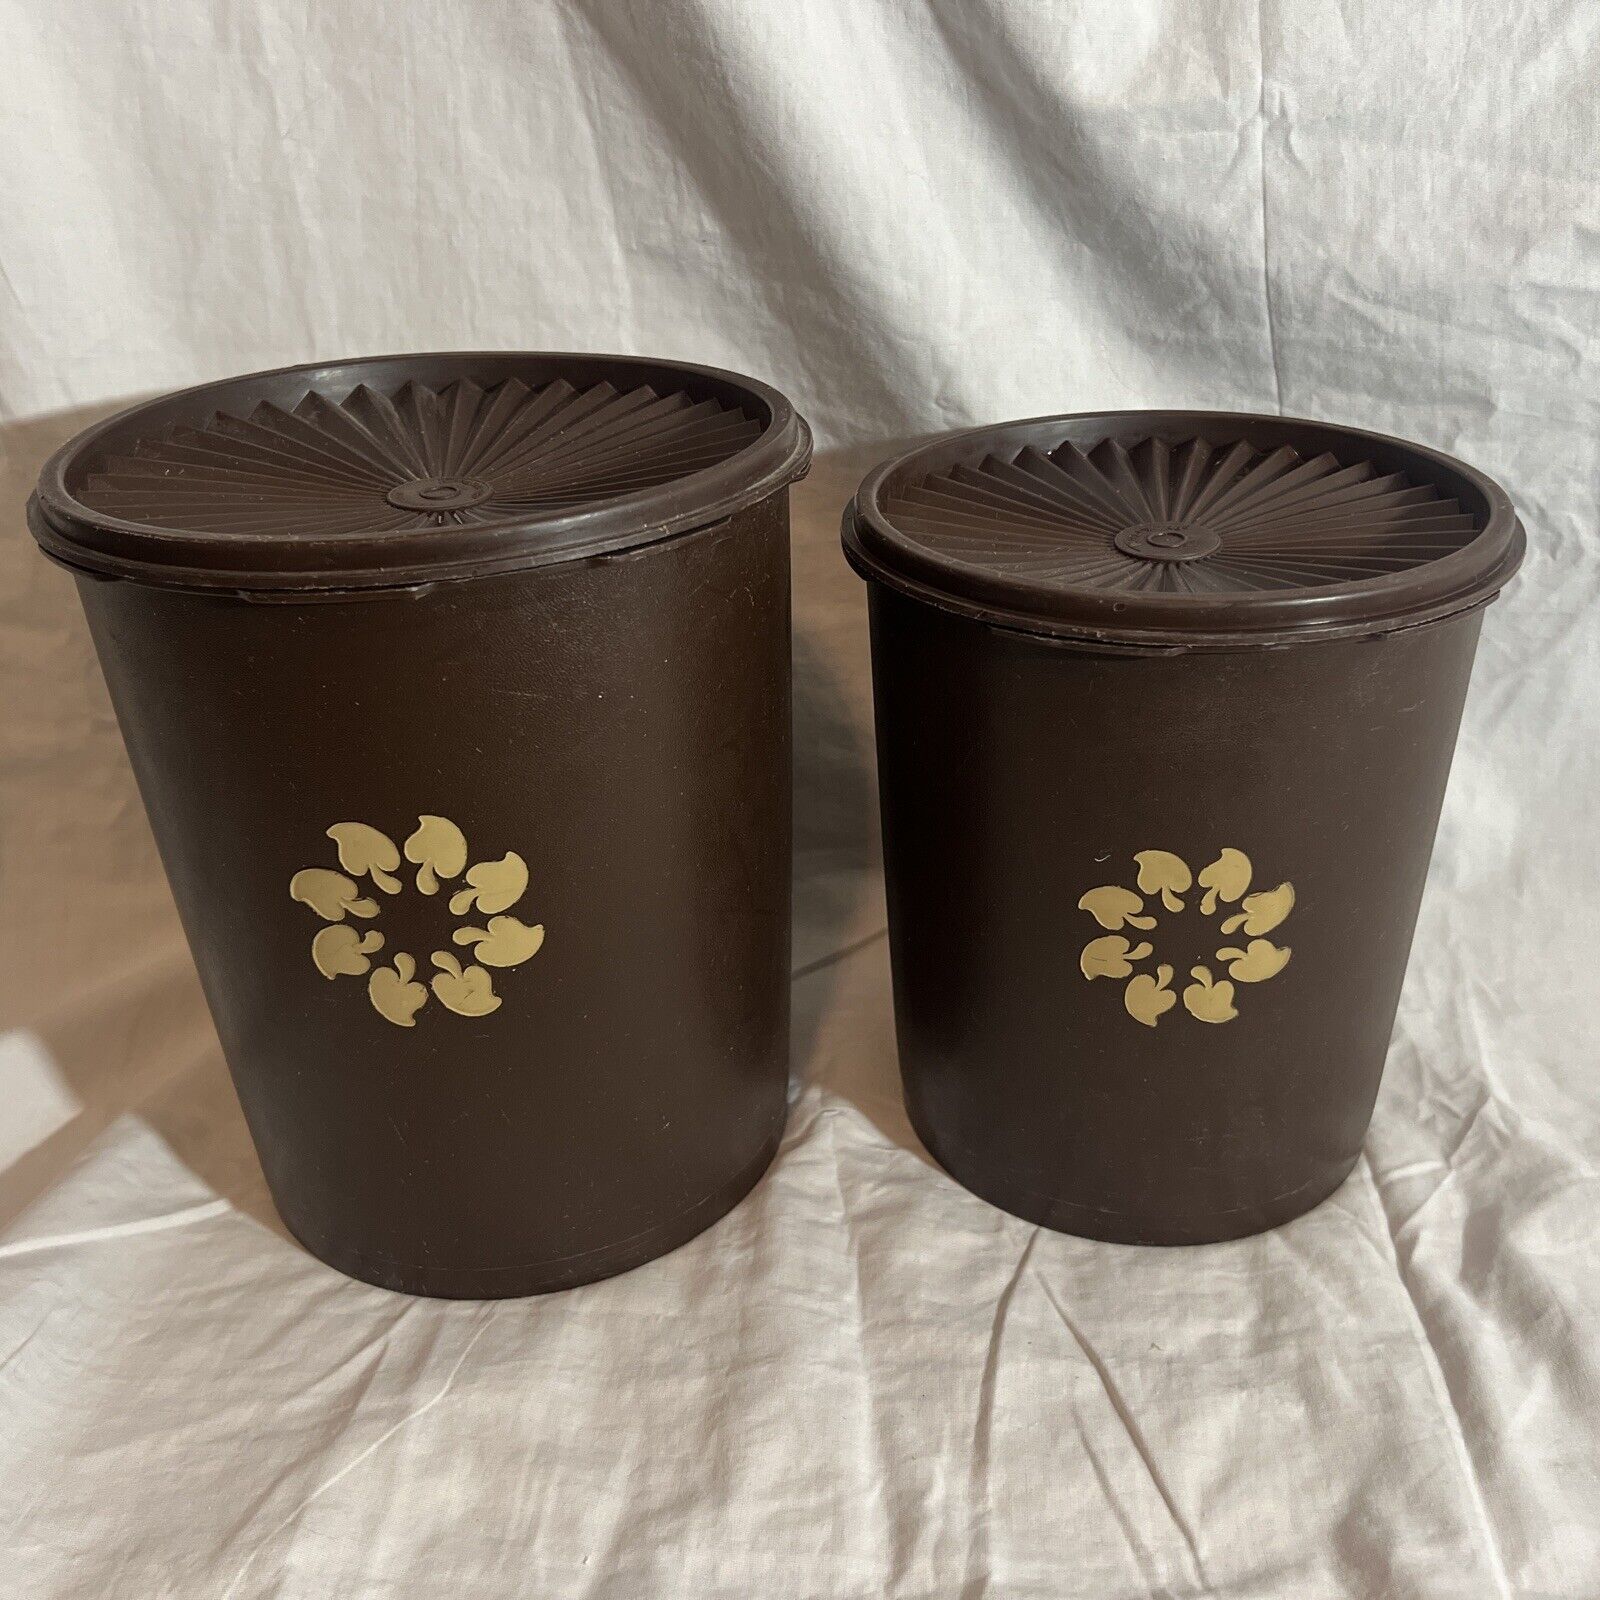 Vintage Tupperware Canisters 809-6 with Lid, Set Of 2